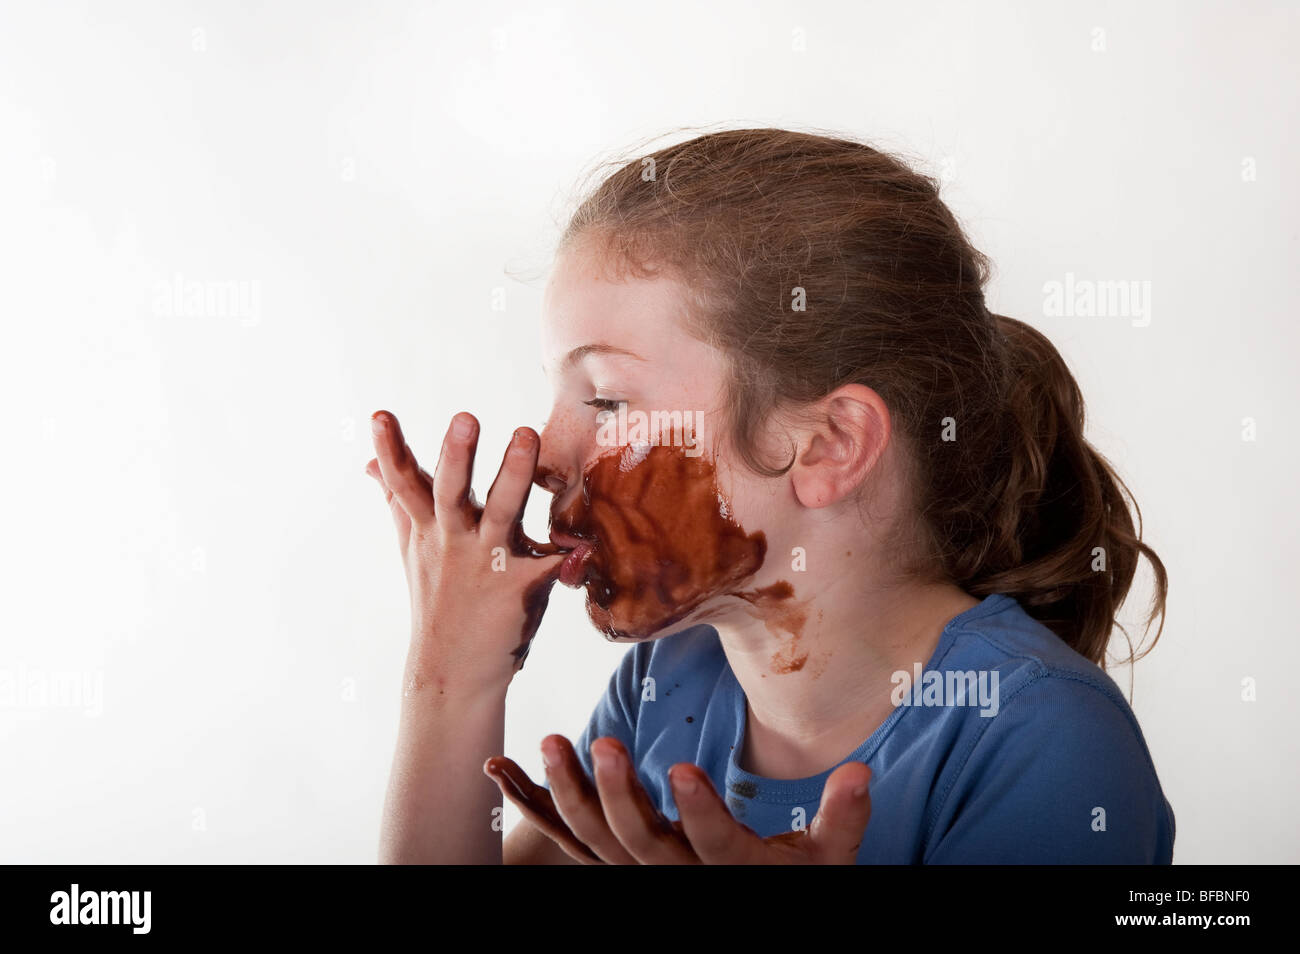 little girl with chocolate covered face and licking fingers Stock Photo